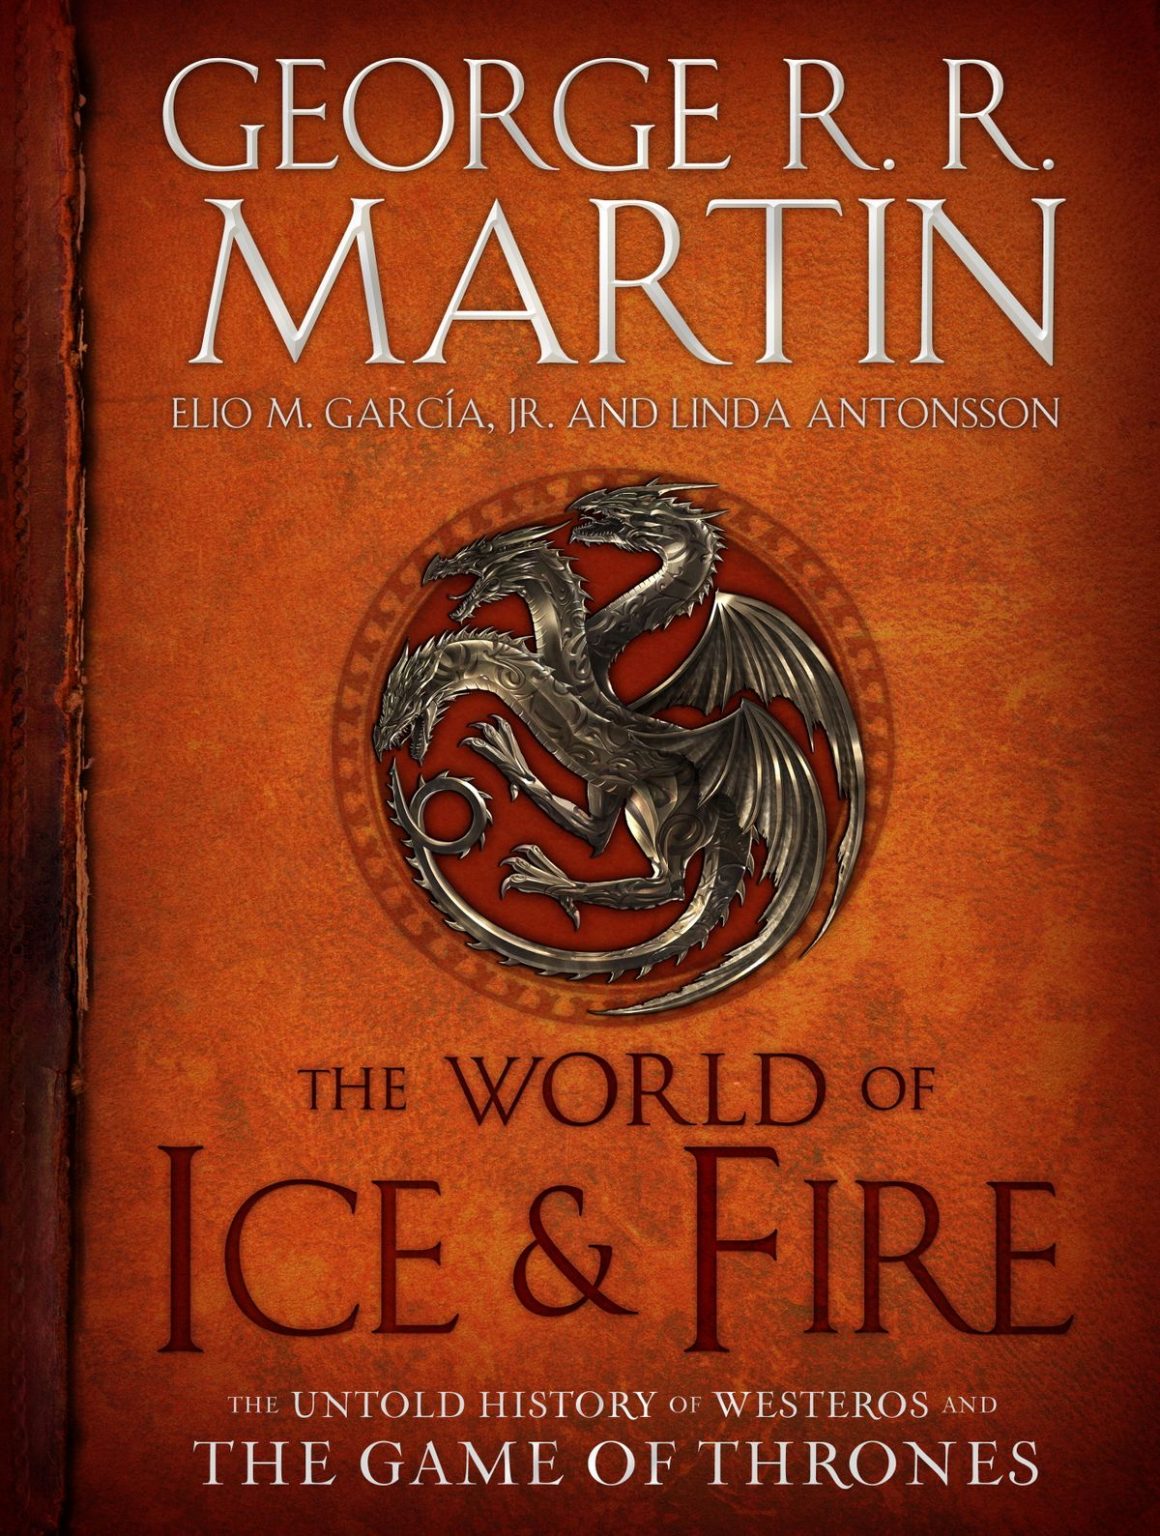 A song of ice and fire ebook pdf download halo reach free download pc